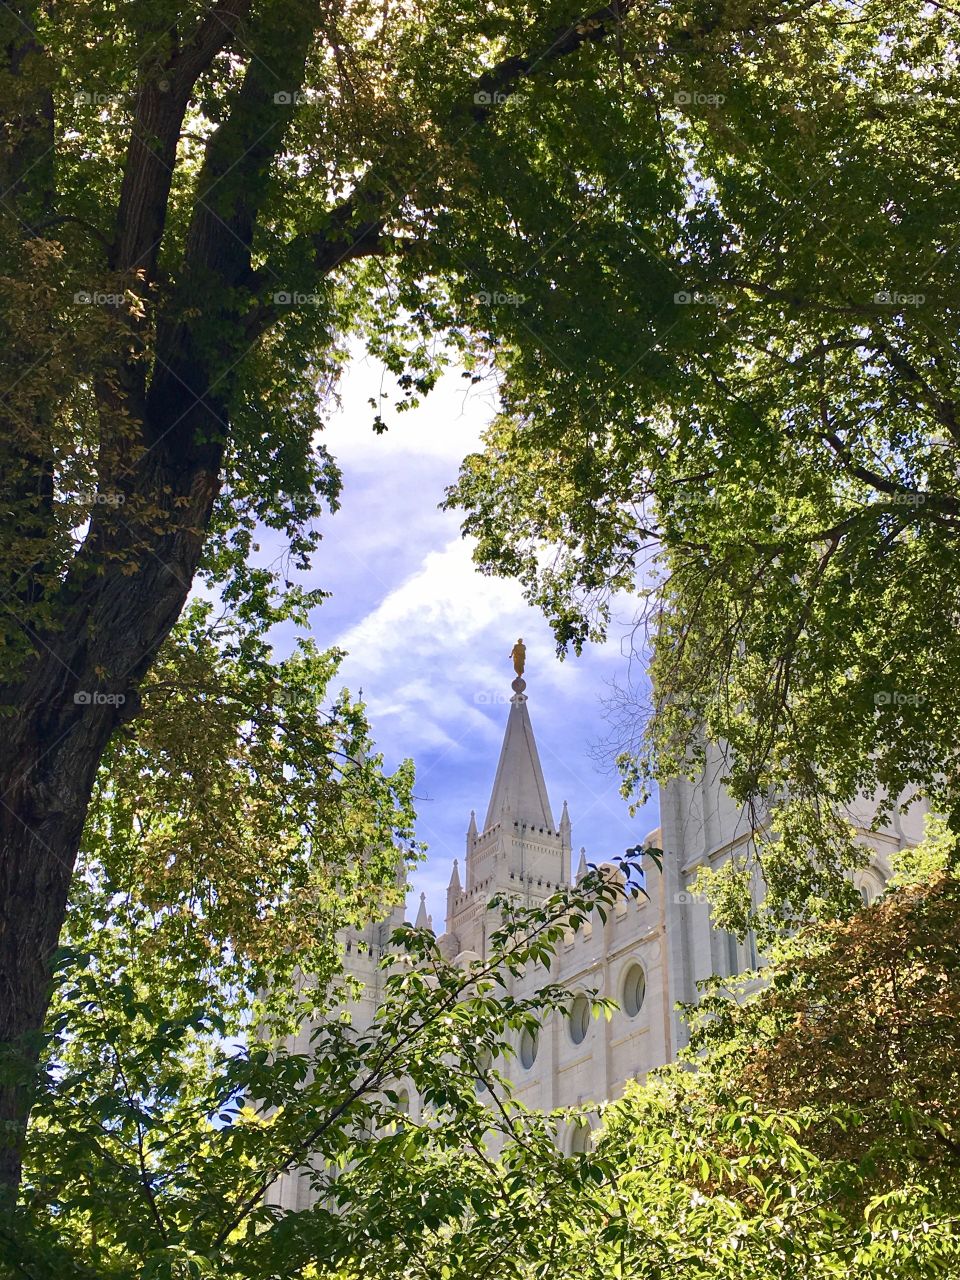 Perfect view. Moroni. Tree framing beautiful building. LDS Temple. Golden statue. Perfect blue sky.